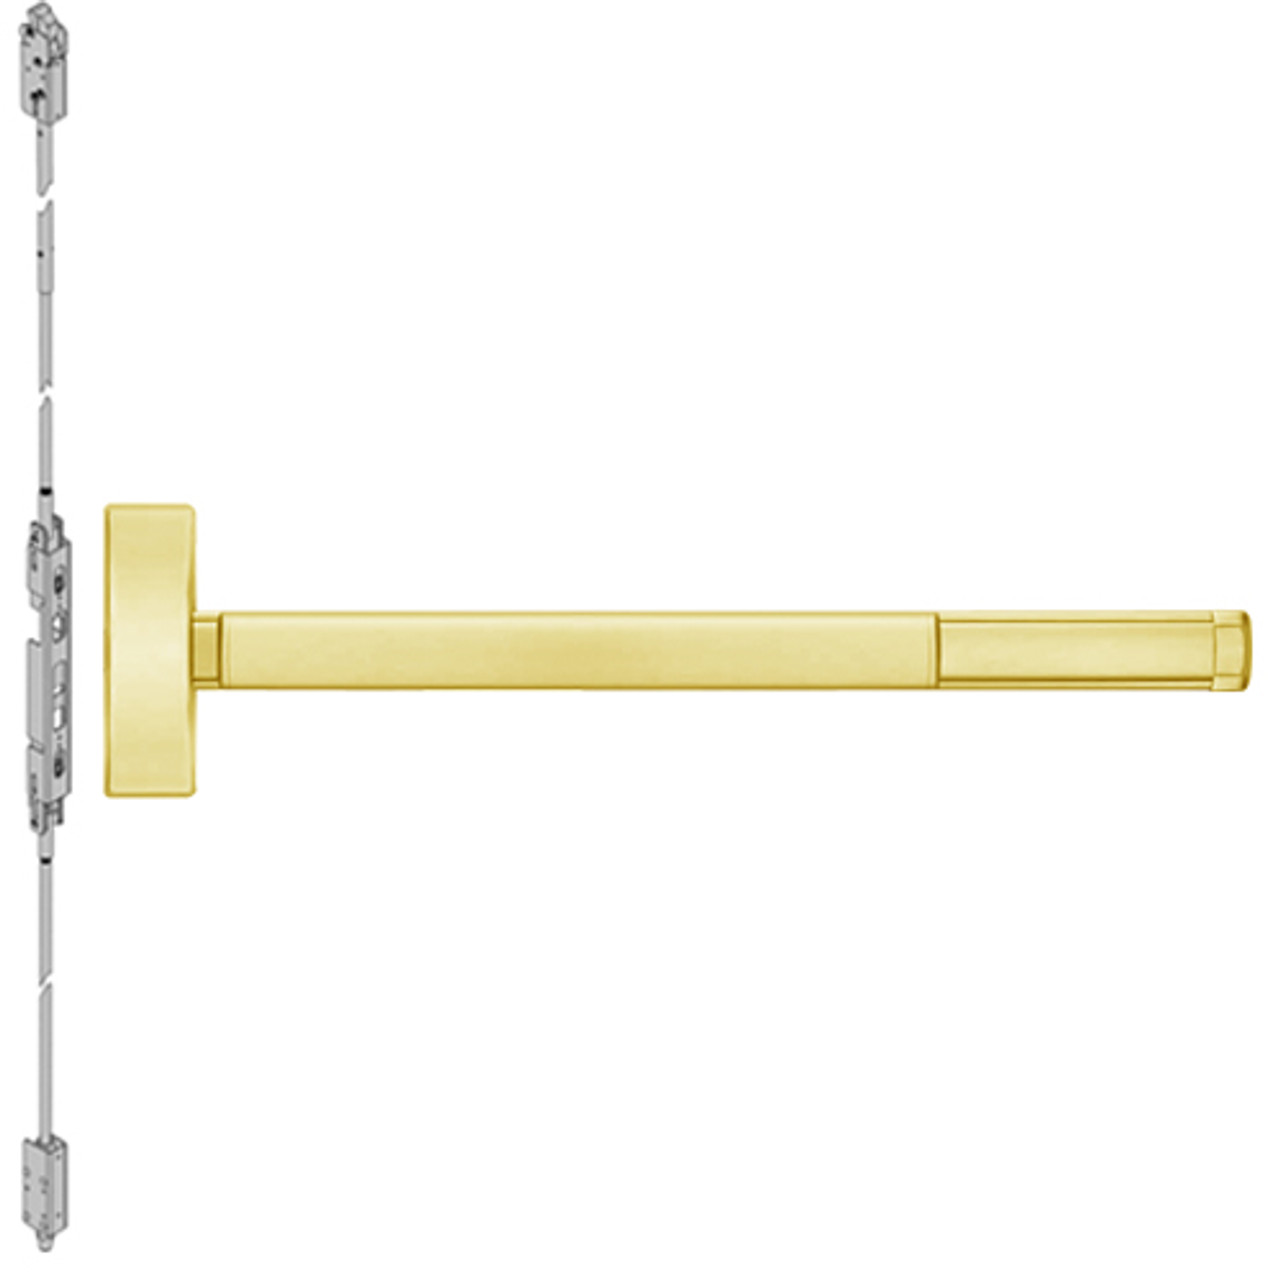 MLRFL2801-605-48 PHI 2800 Series Fire Rated Concealed Vertical Rod Exit Device with Motorized Latch Retraction Prepped for Cover Plate in Bright Brass Finish